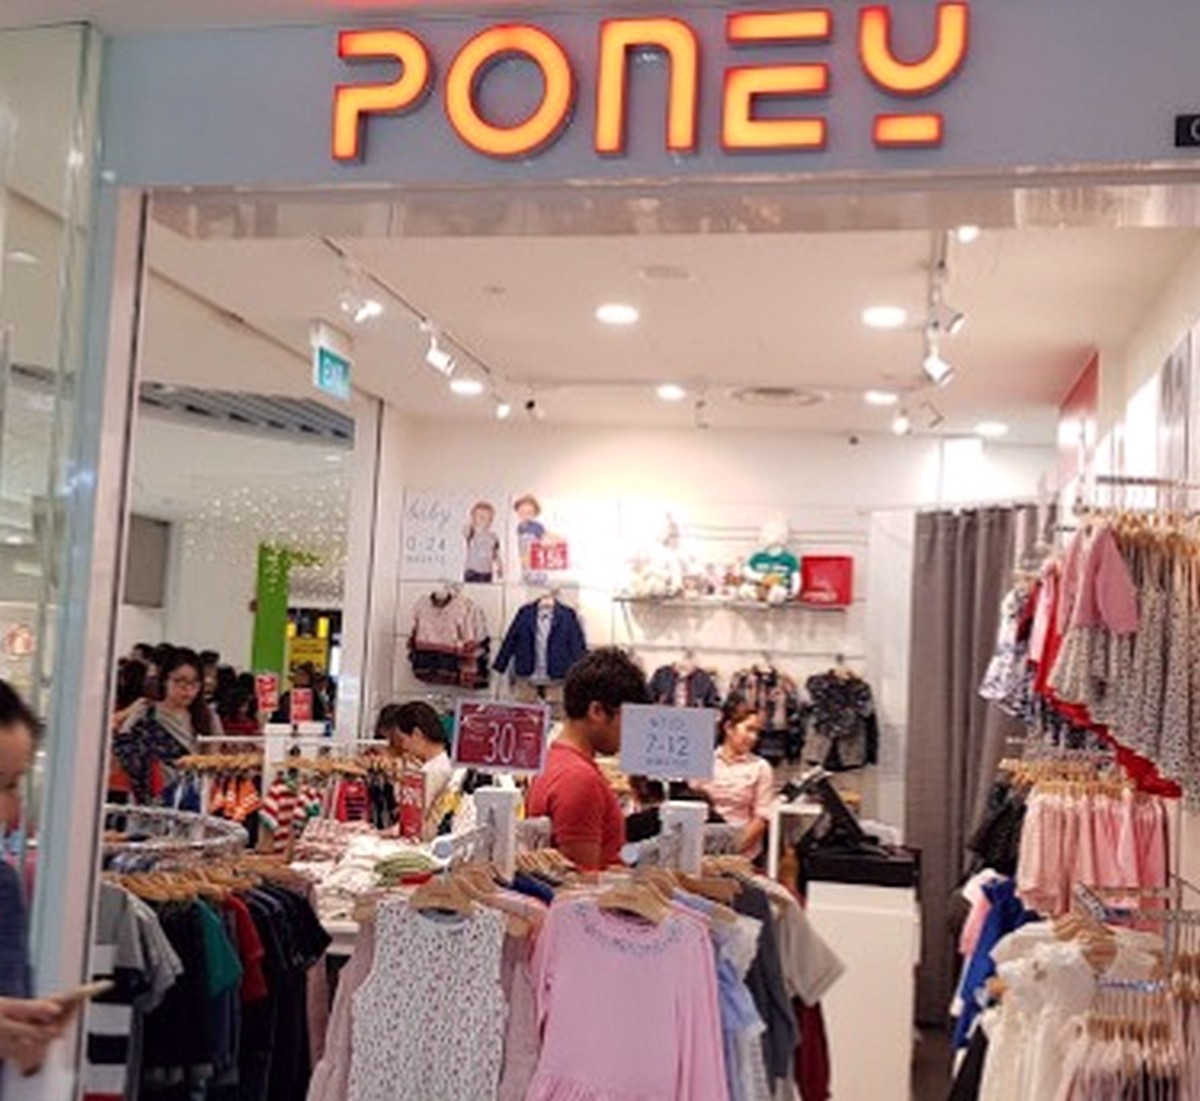 compass-one-poney-Google-Search 16 Apr-16 May 2021: Poney Kid Apparel Sale at Compass One! Up to 60% OFF!